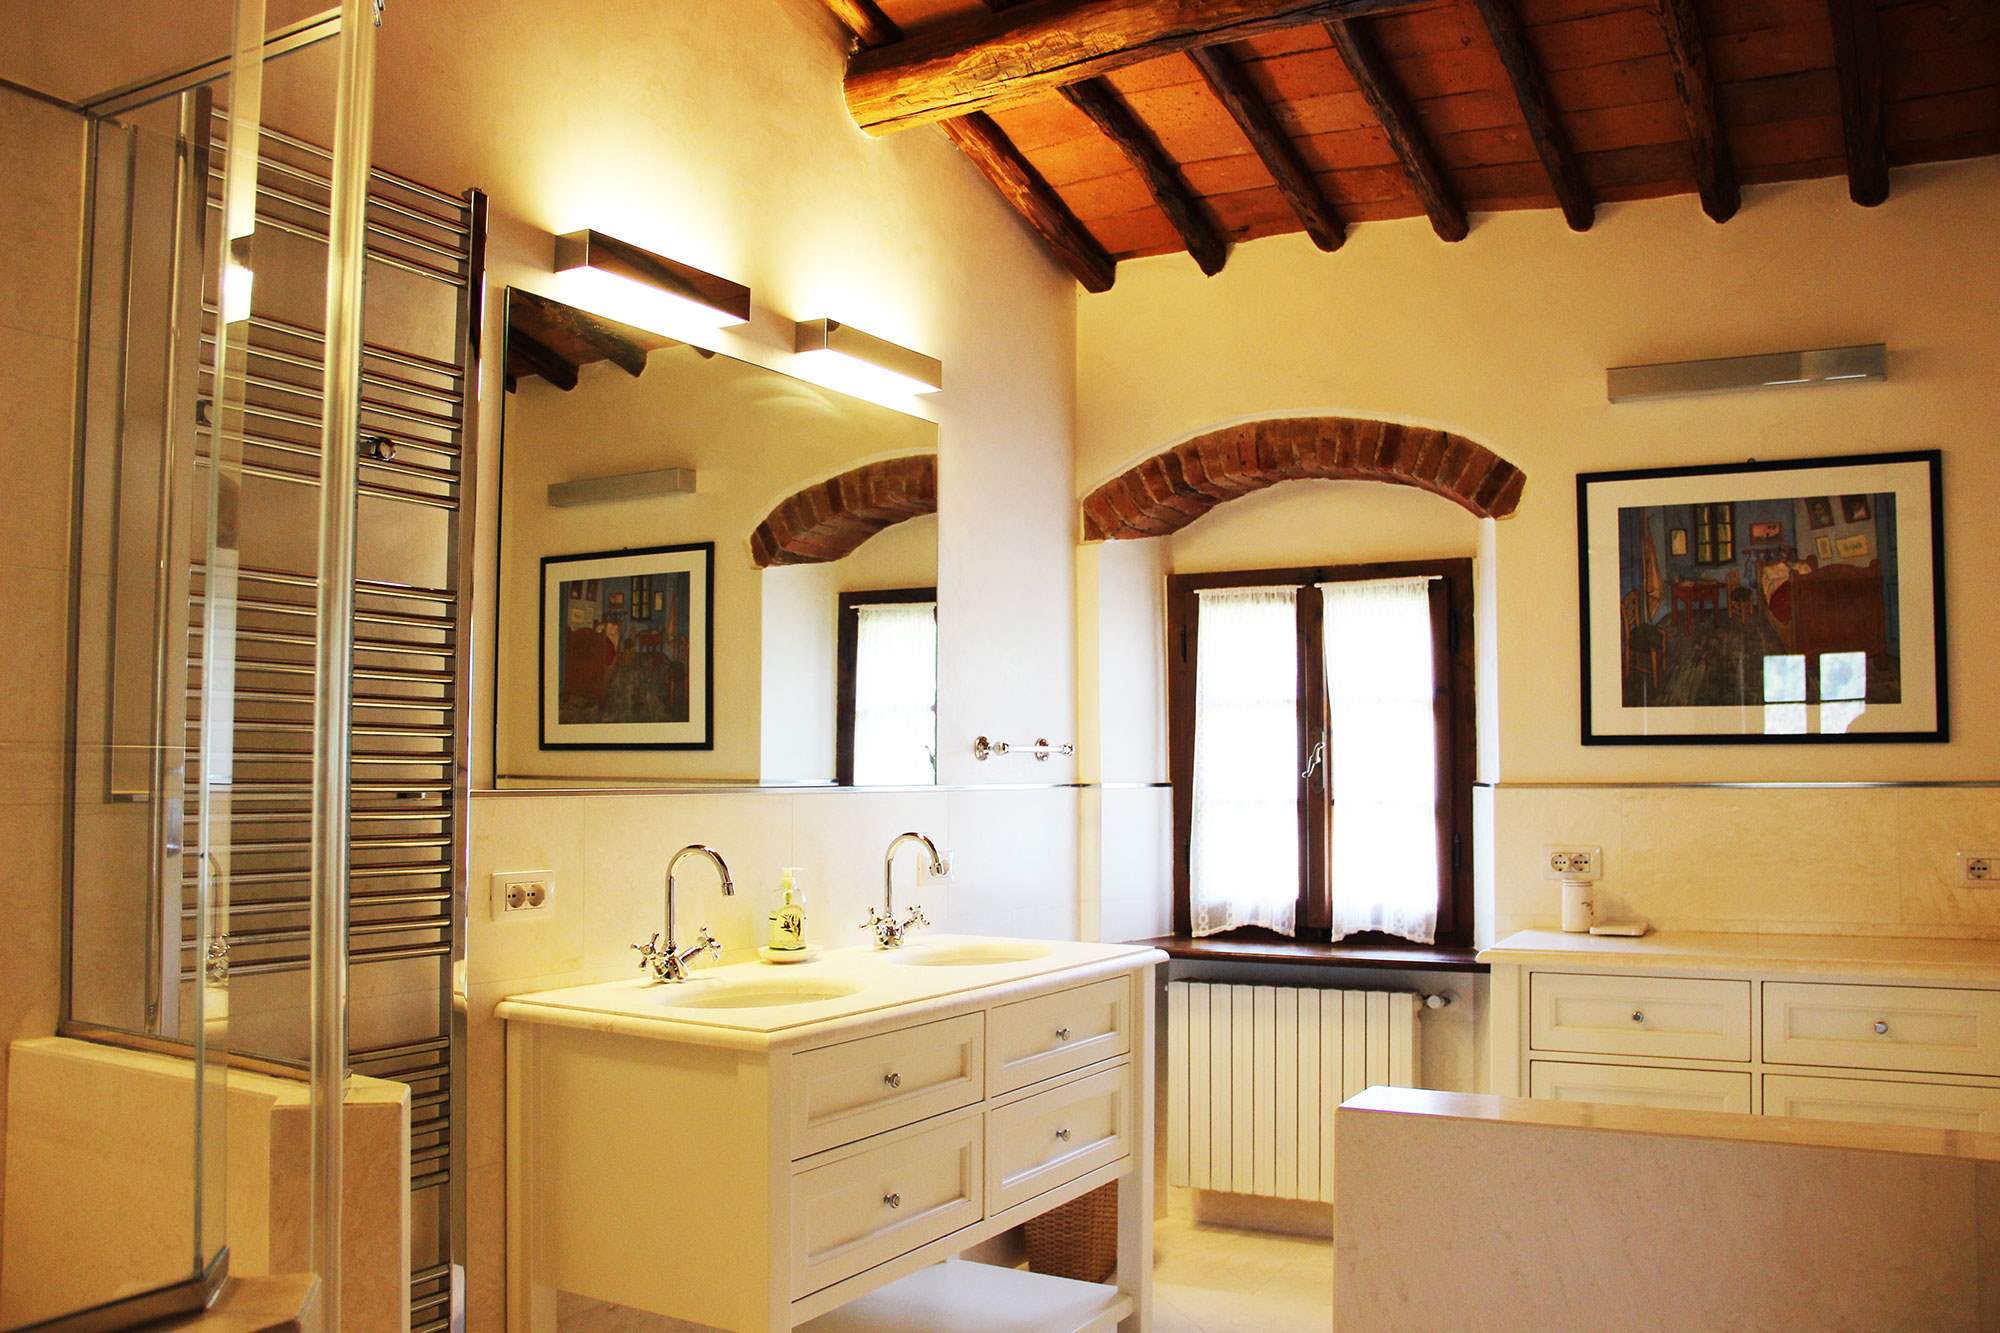 Villa Felicita, Main house and apartment, 10 persons rate, 5 bedroom villa in Chianti & Countryside, Tuscany Photo #14